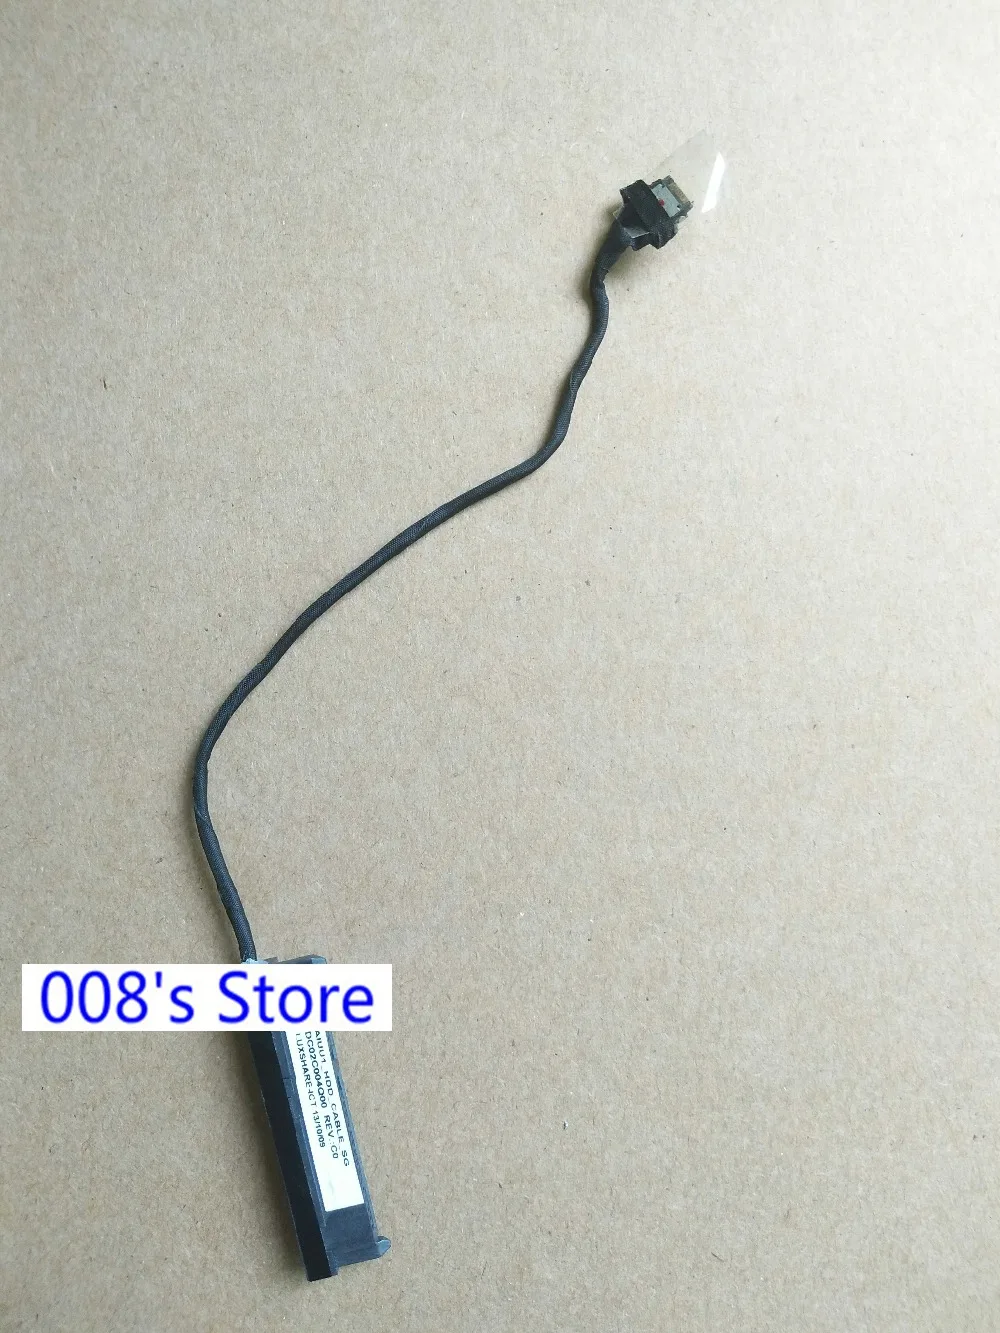 

New Laptop Hard Drive Disk Interface Cable For Lenovo YOGA 2 11 SATA DC02C004Q00 Notebook AIUU1 HDD Flex Connector